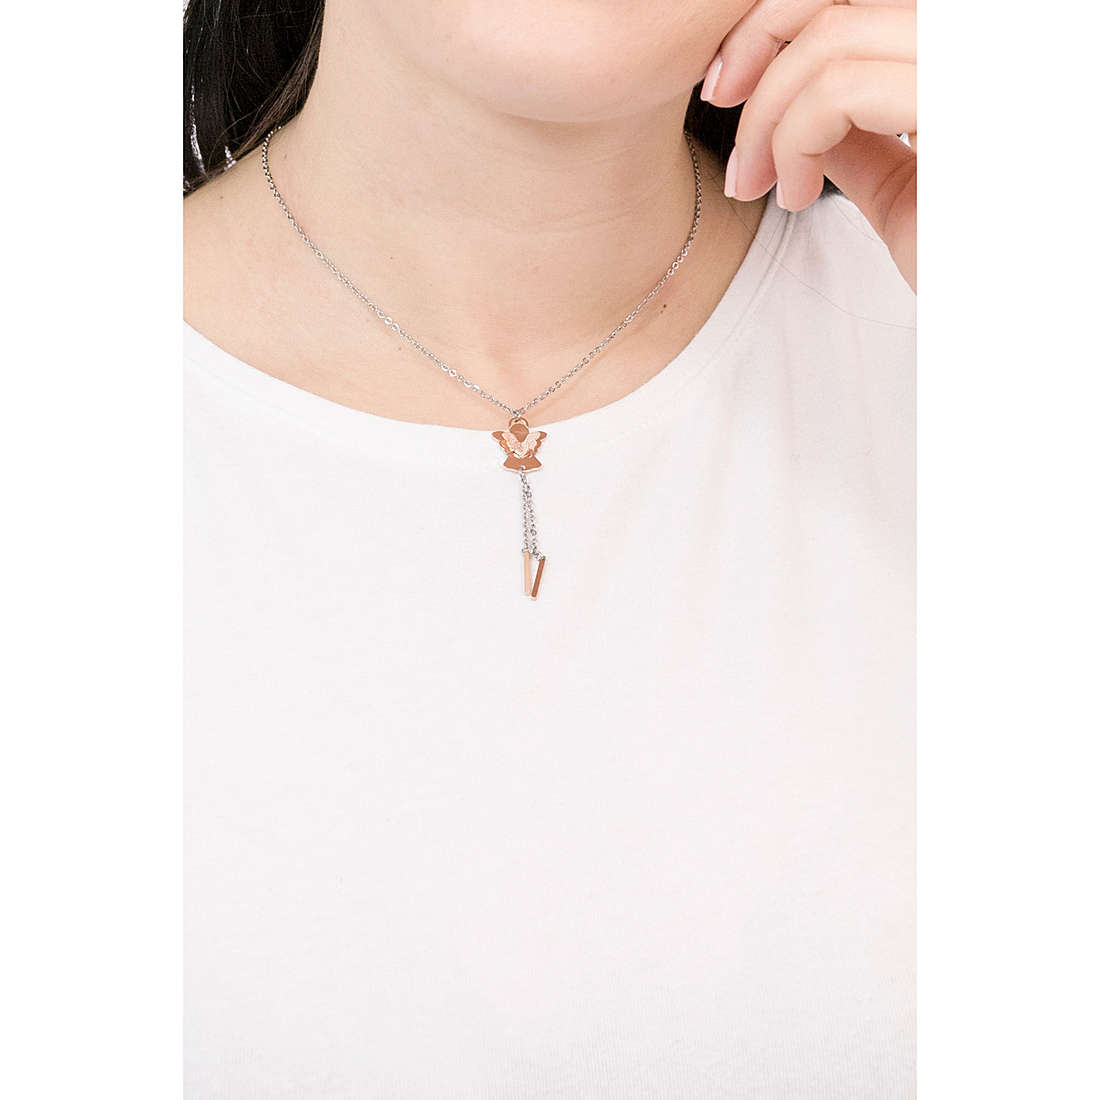 Luca Barra necklaces Brilliant Time woman CK1475 wearing